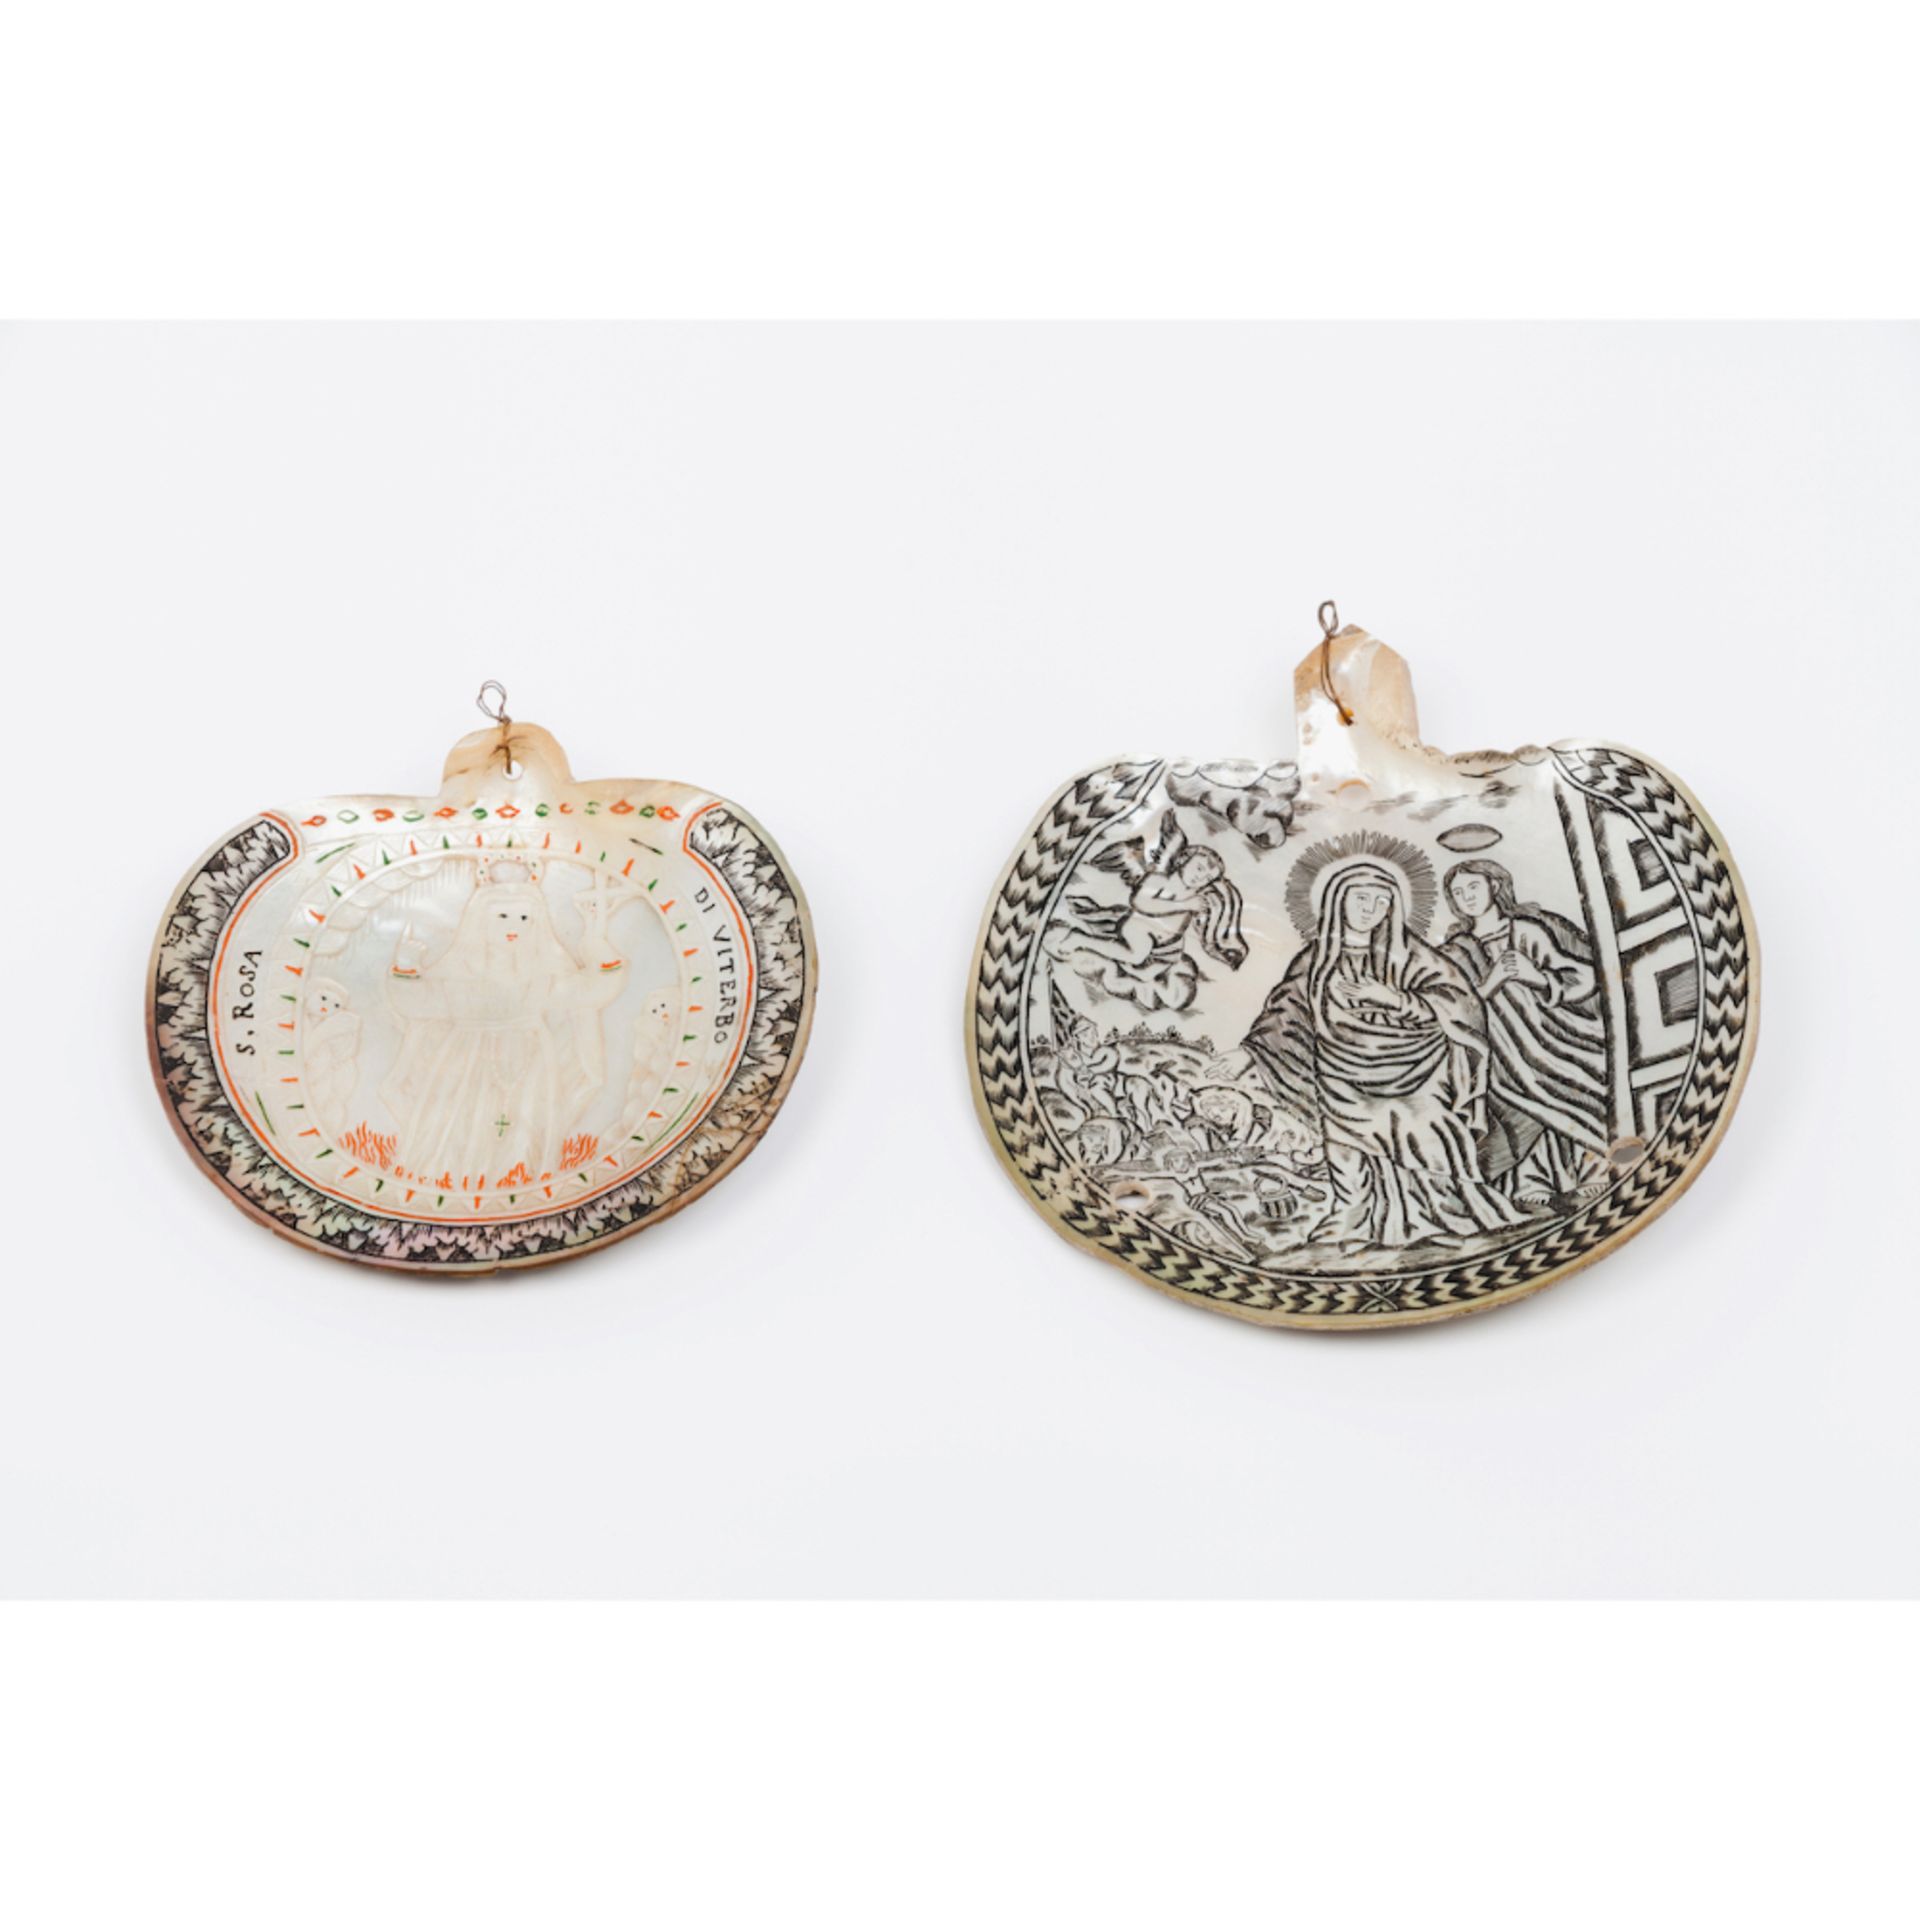 A two shell setMother-of-pearl Incised and sgrafittoed decoration One depicting Saint Rose and the